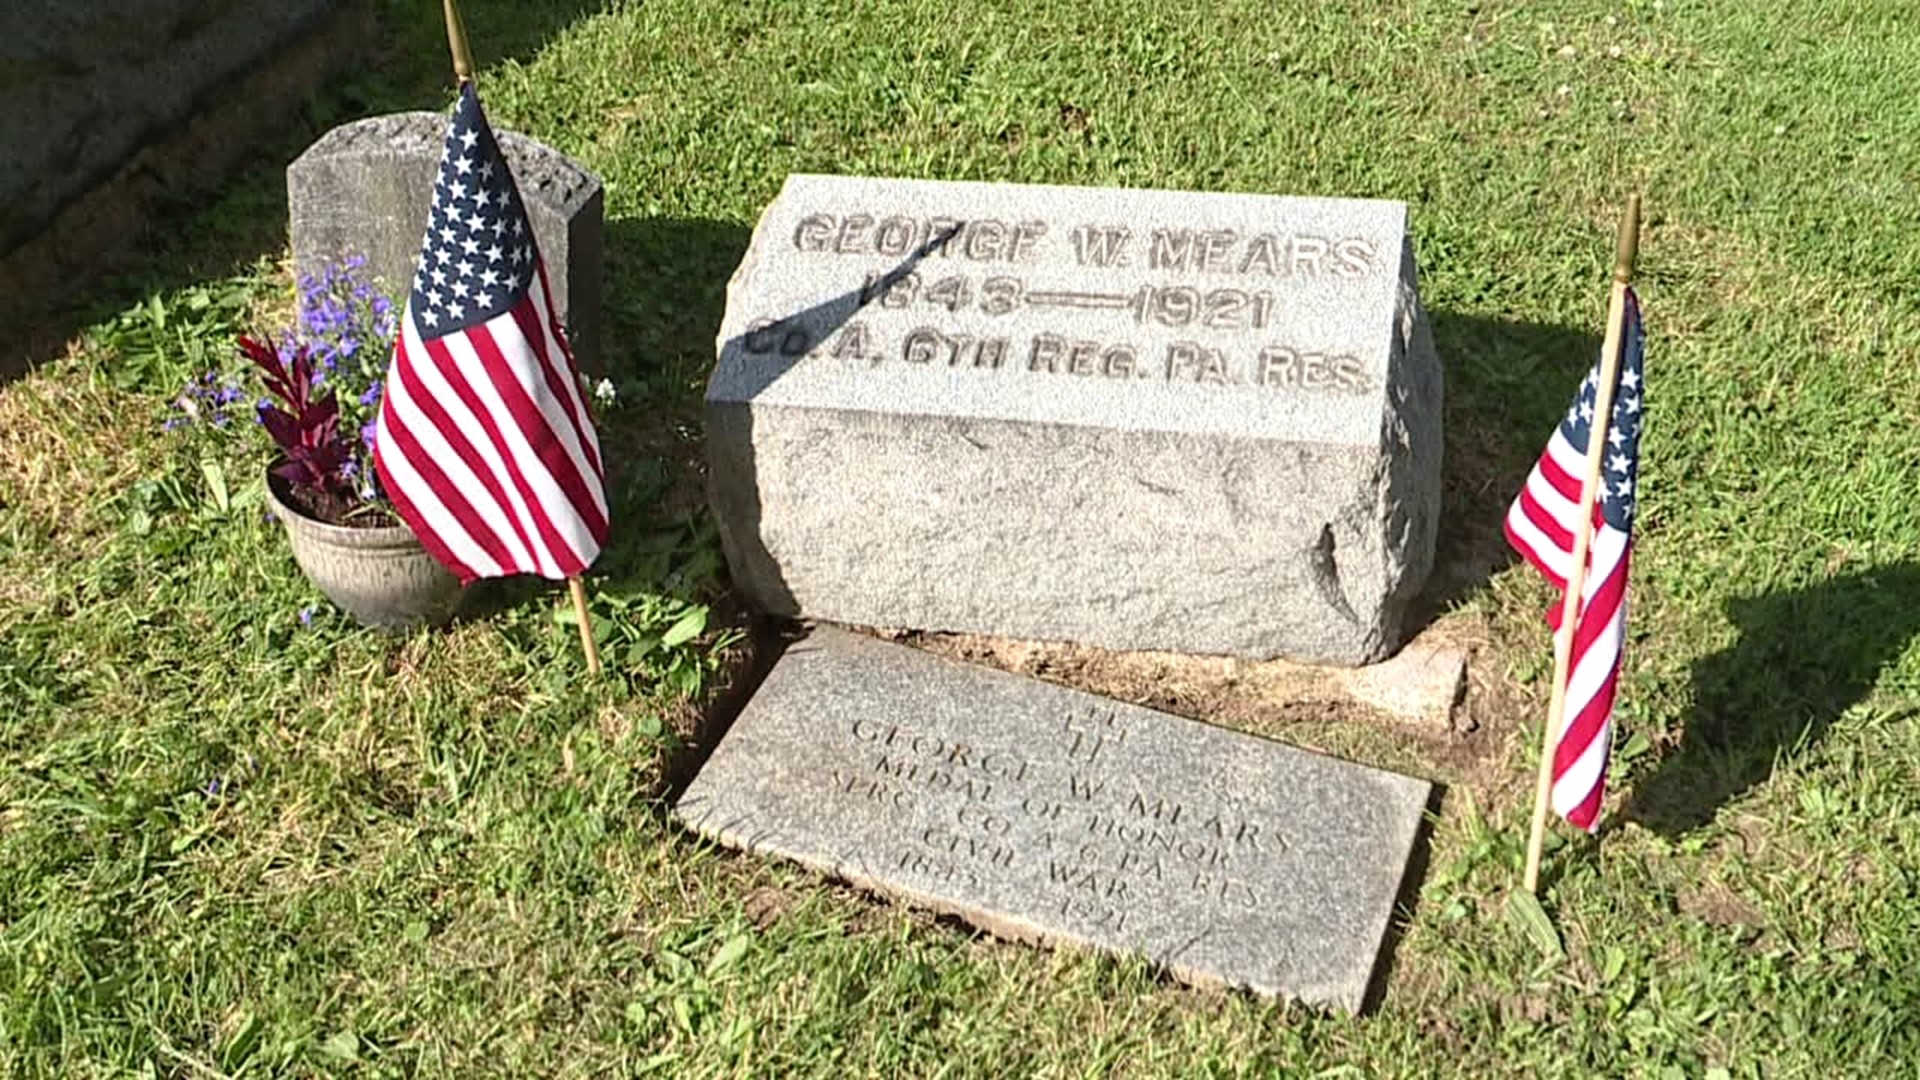 The graves of Civil War Veterans and Medal of Honor recipients in Columbia County had been long forgotten until one man decided to change that.